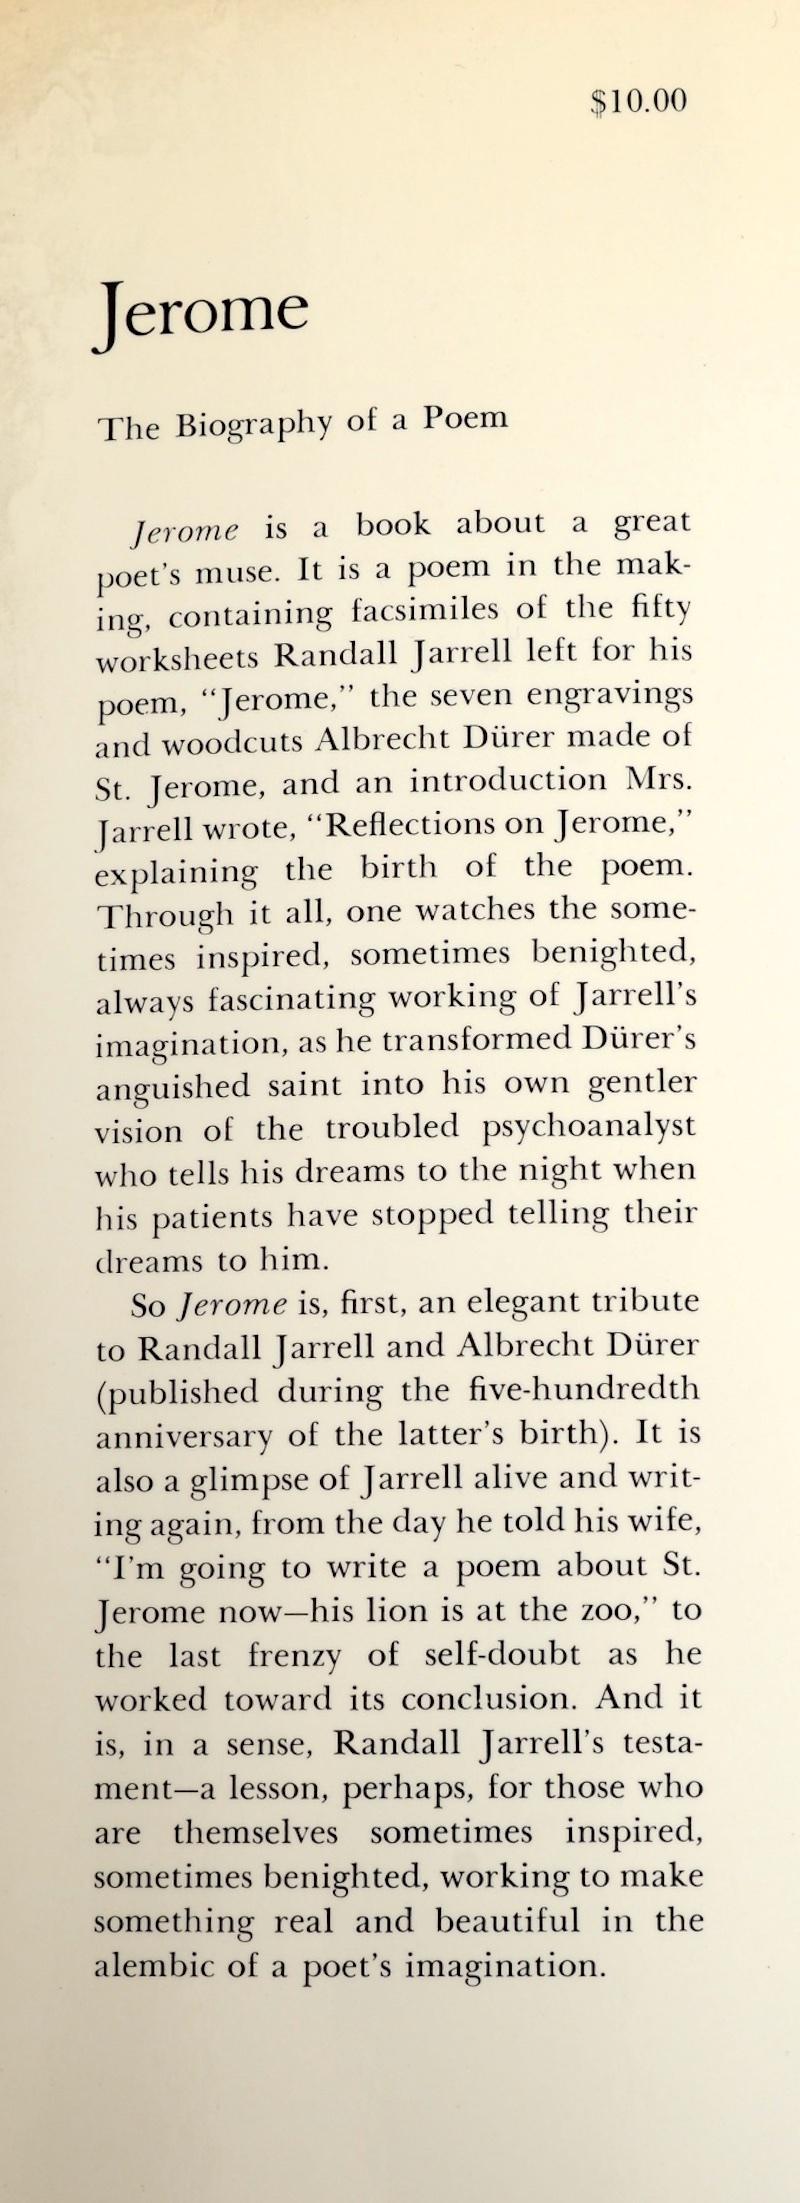 Jerome the Biography of a Poem by Randall Jarrell 2